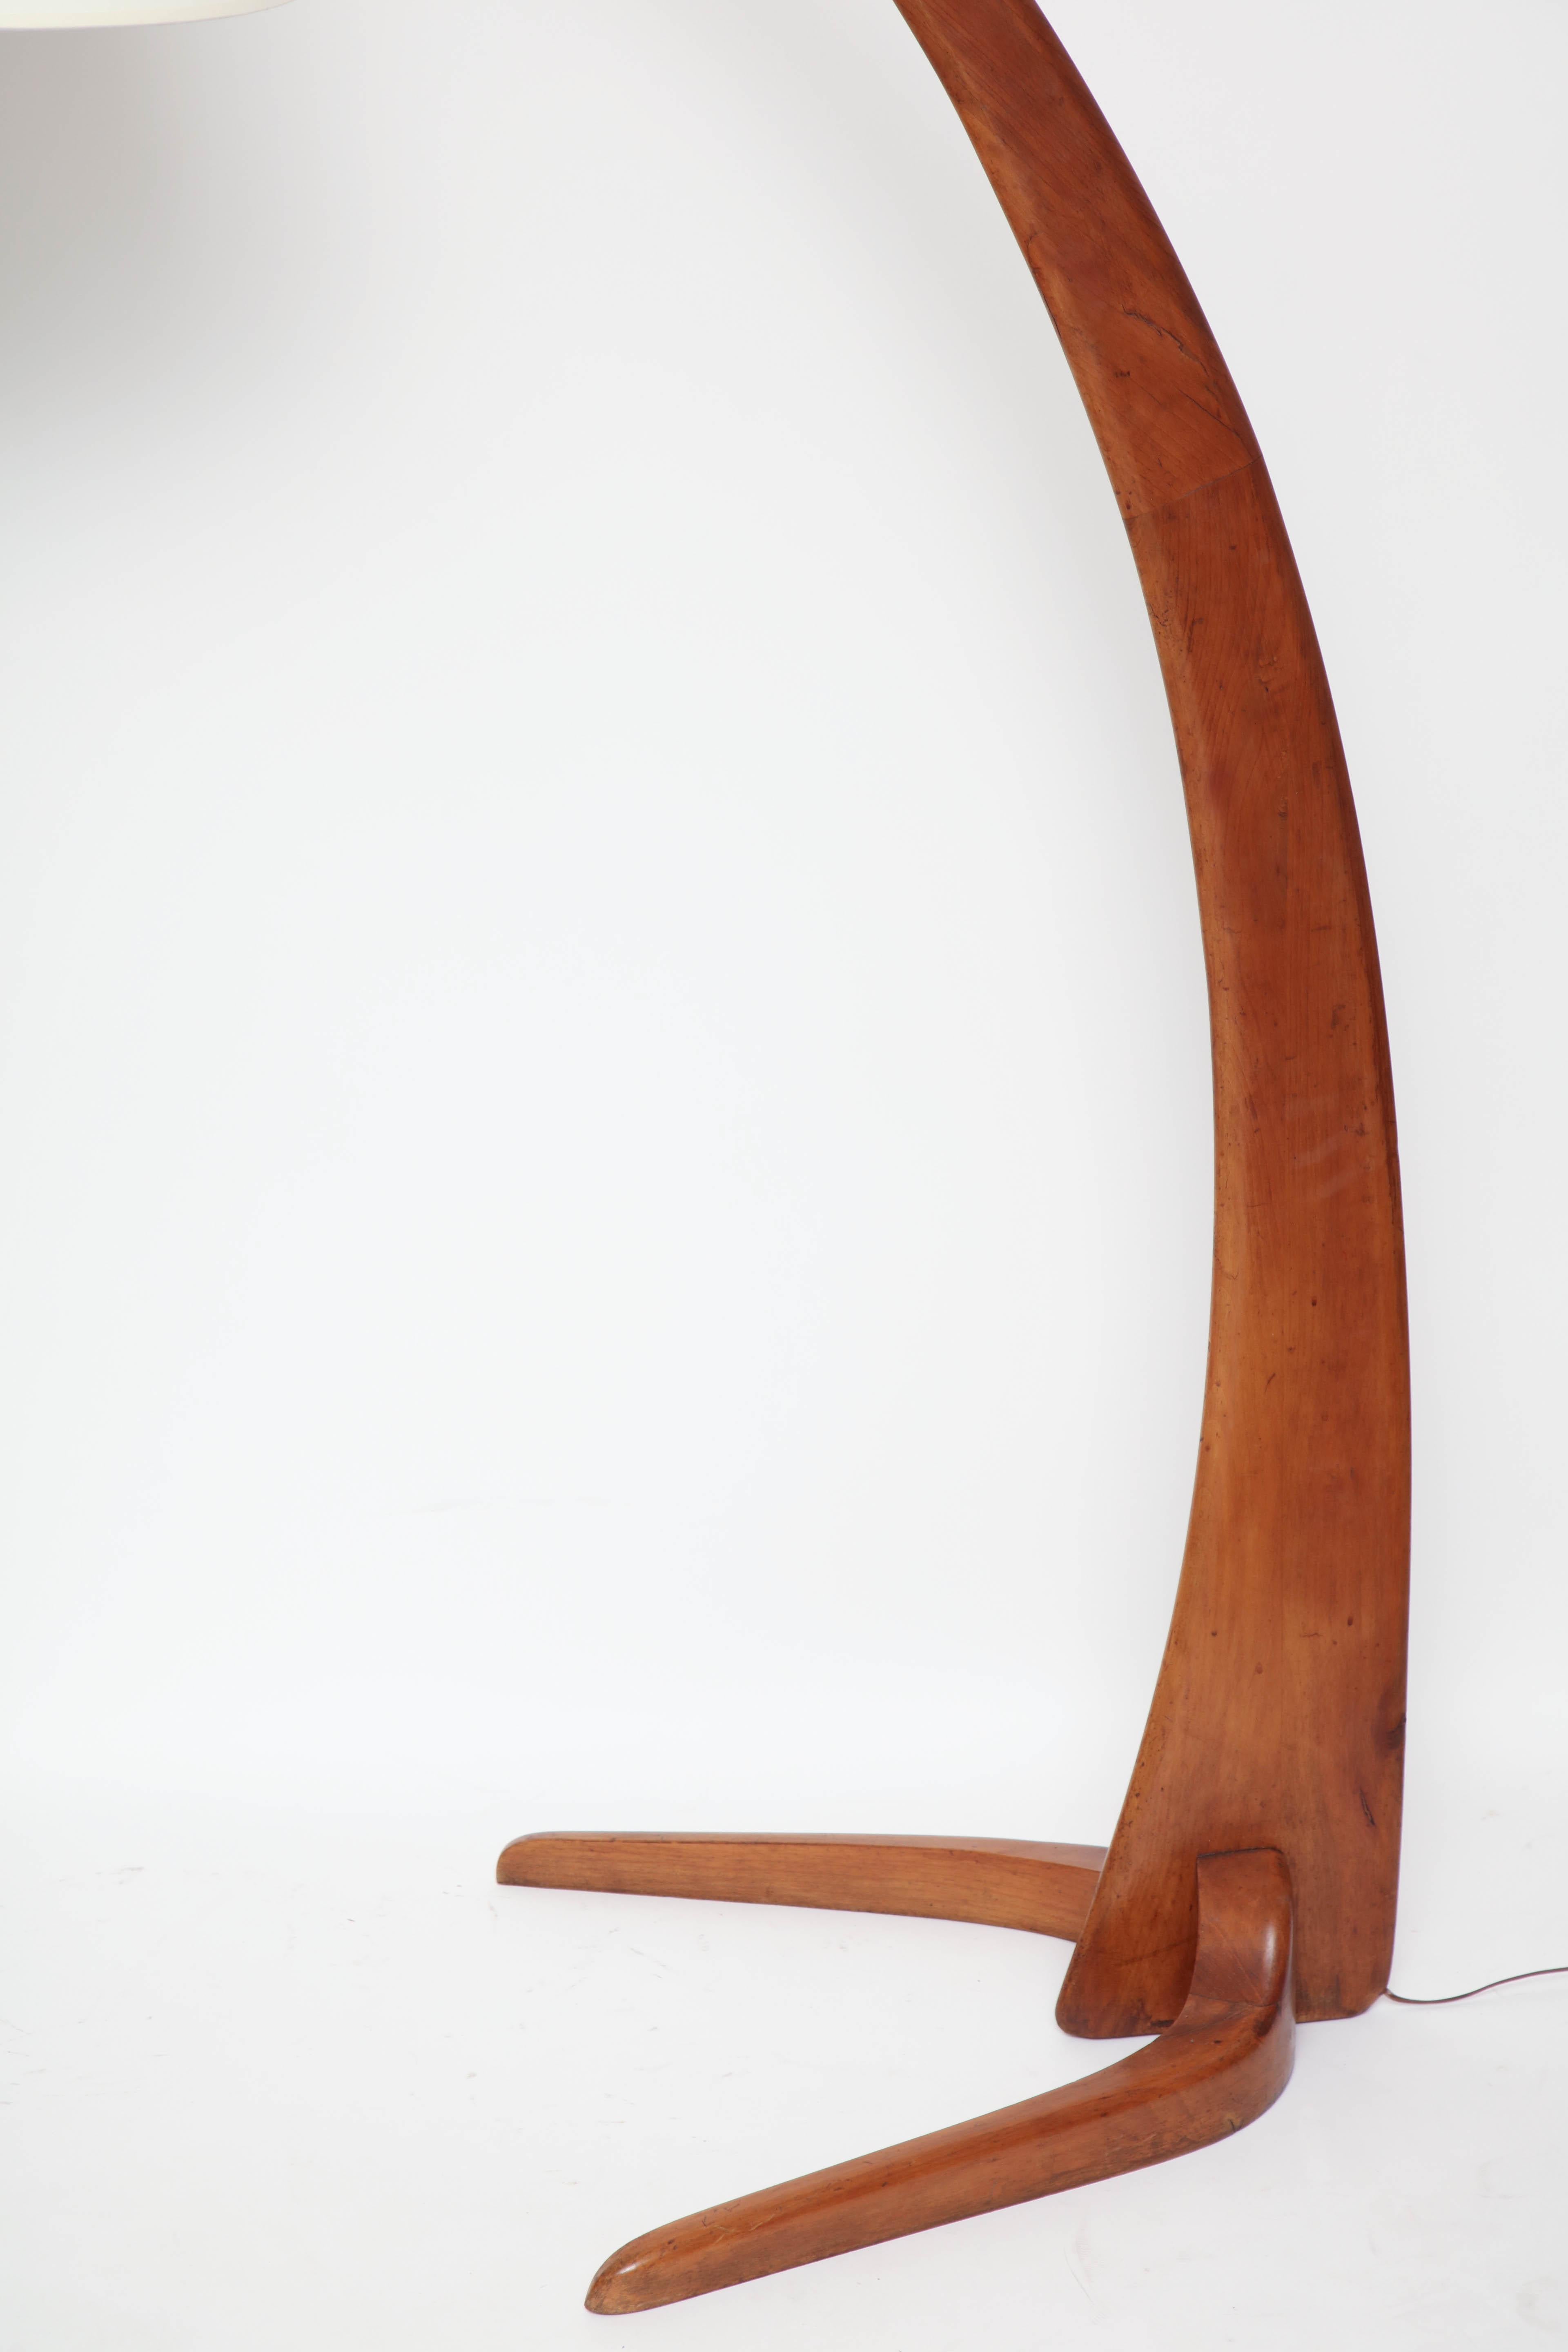 Italian Midcentury Curved Cherry Wood Reading Lamp with Shade, Italy, circa 1950